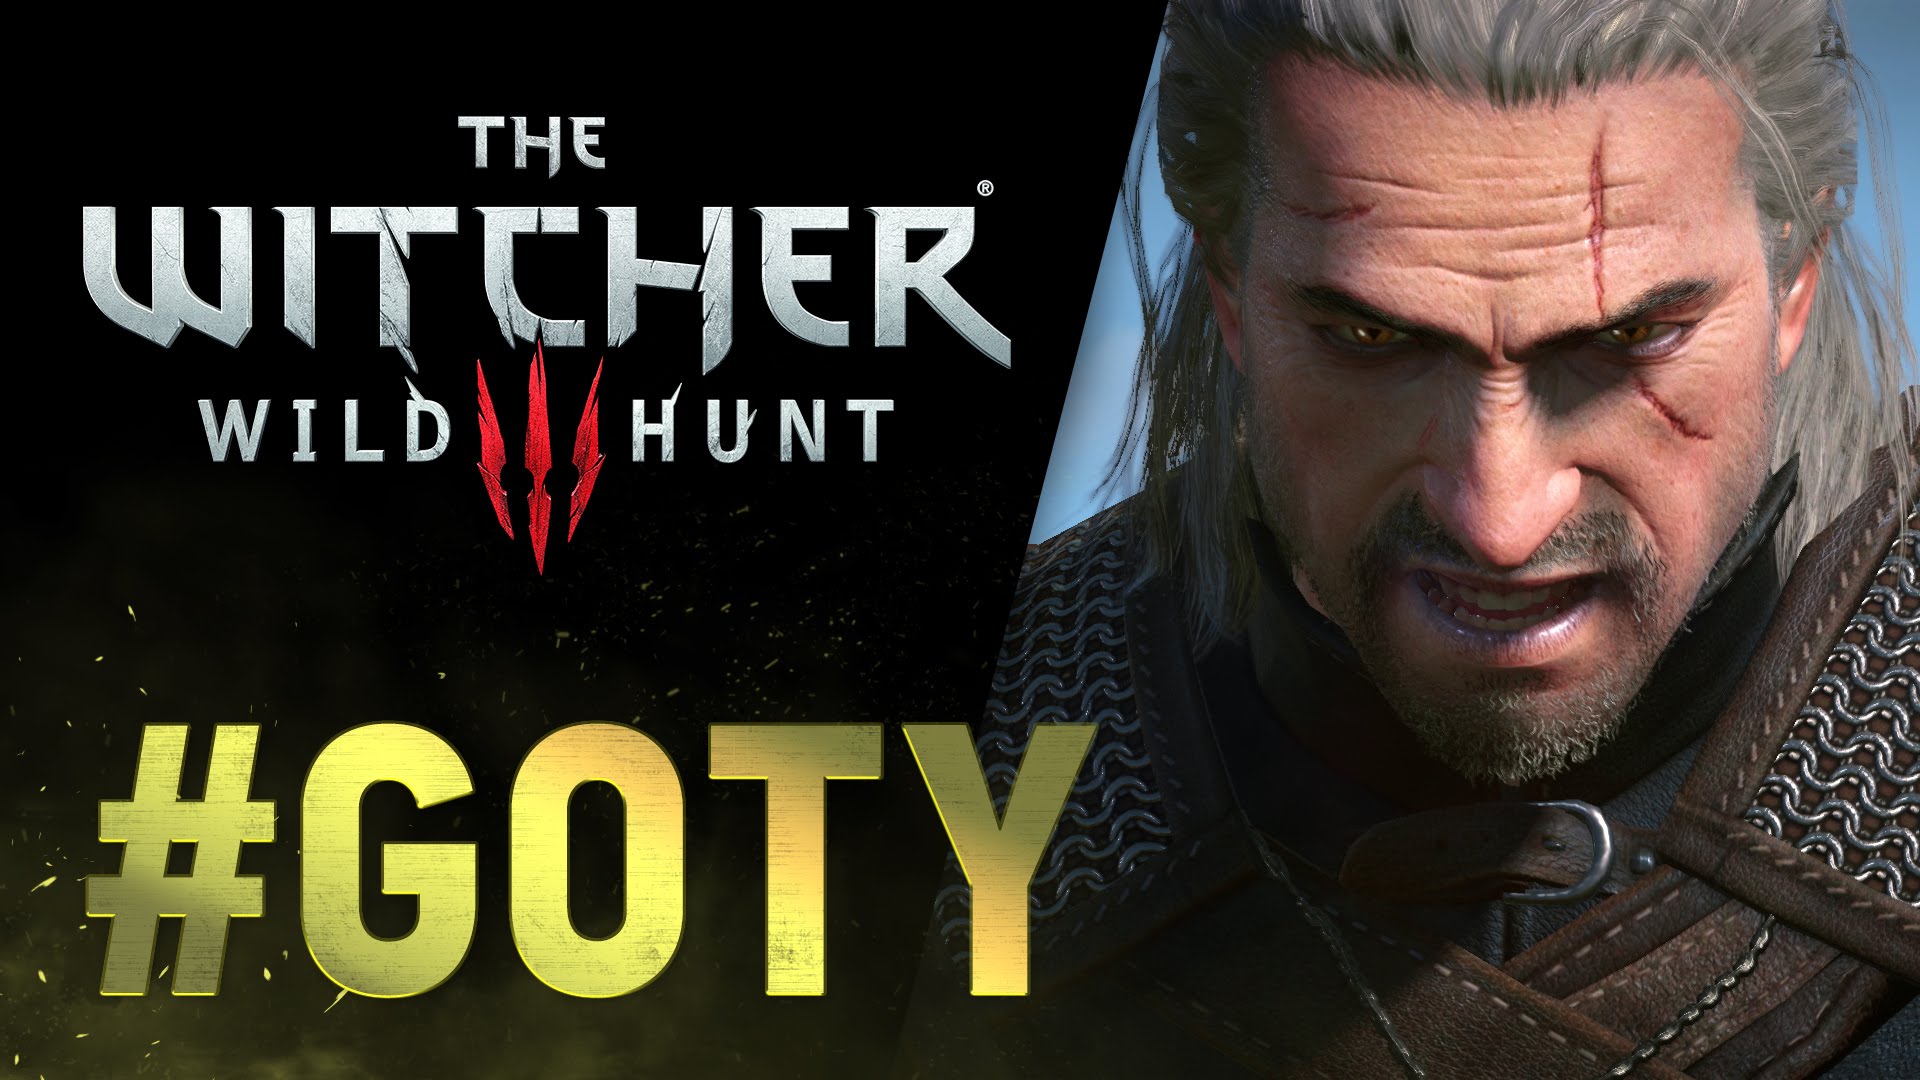 The Witcher 3 Goty Edition Released The Witcher 3 Wild Hunt Game